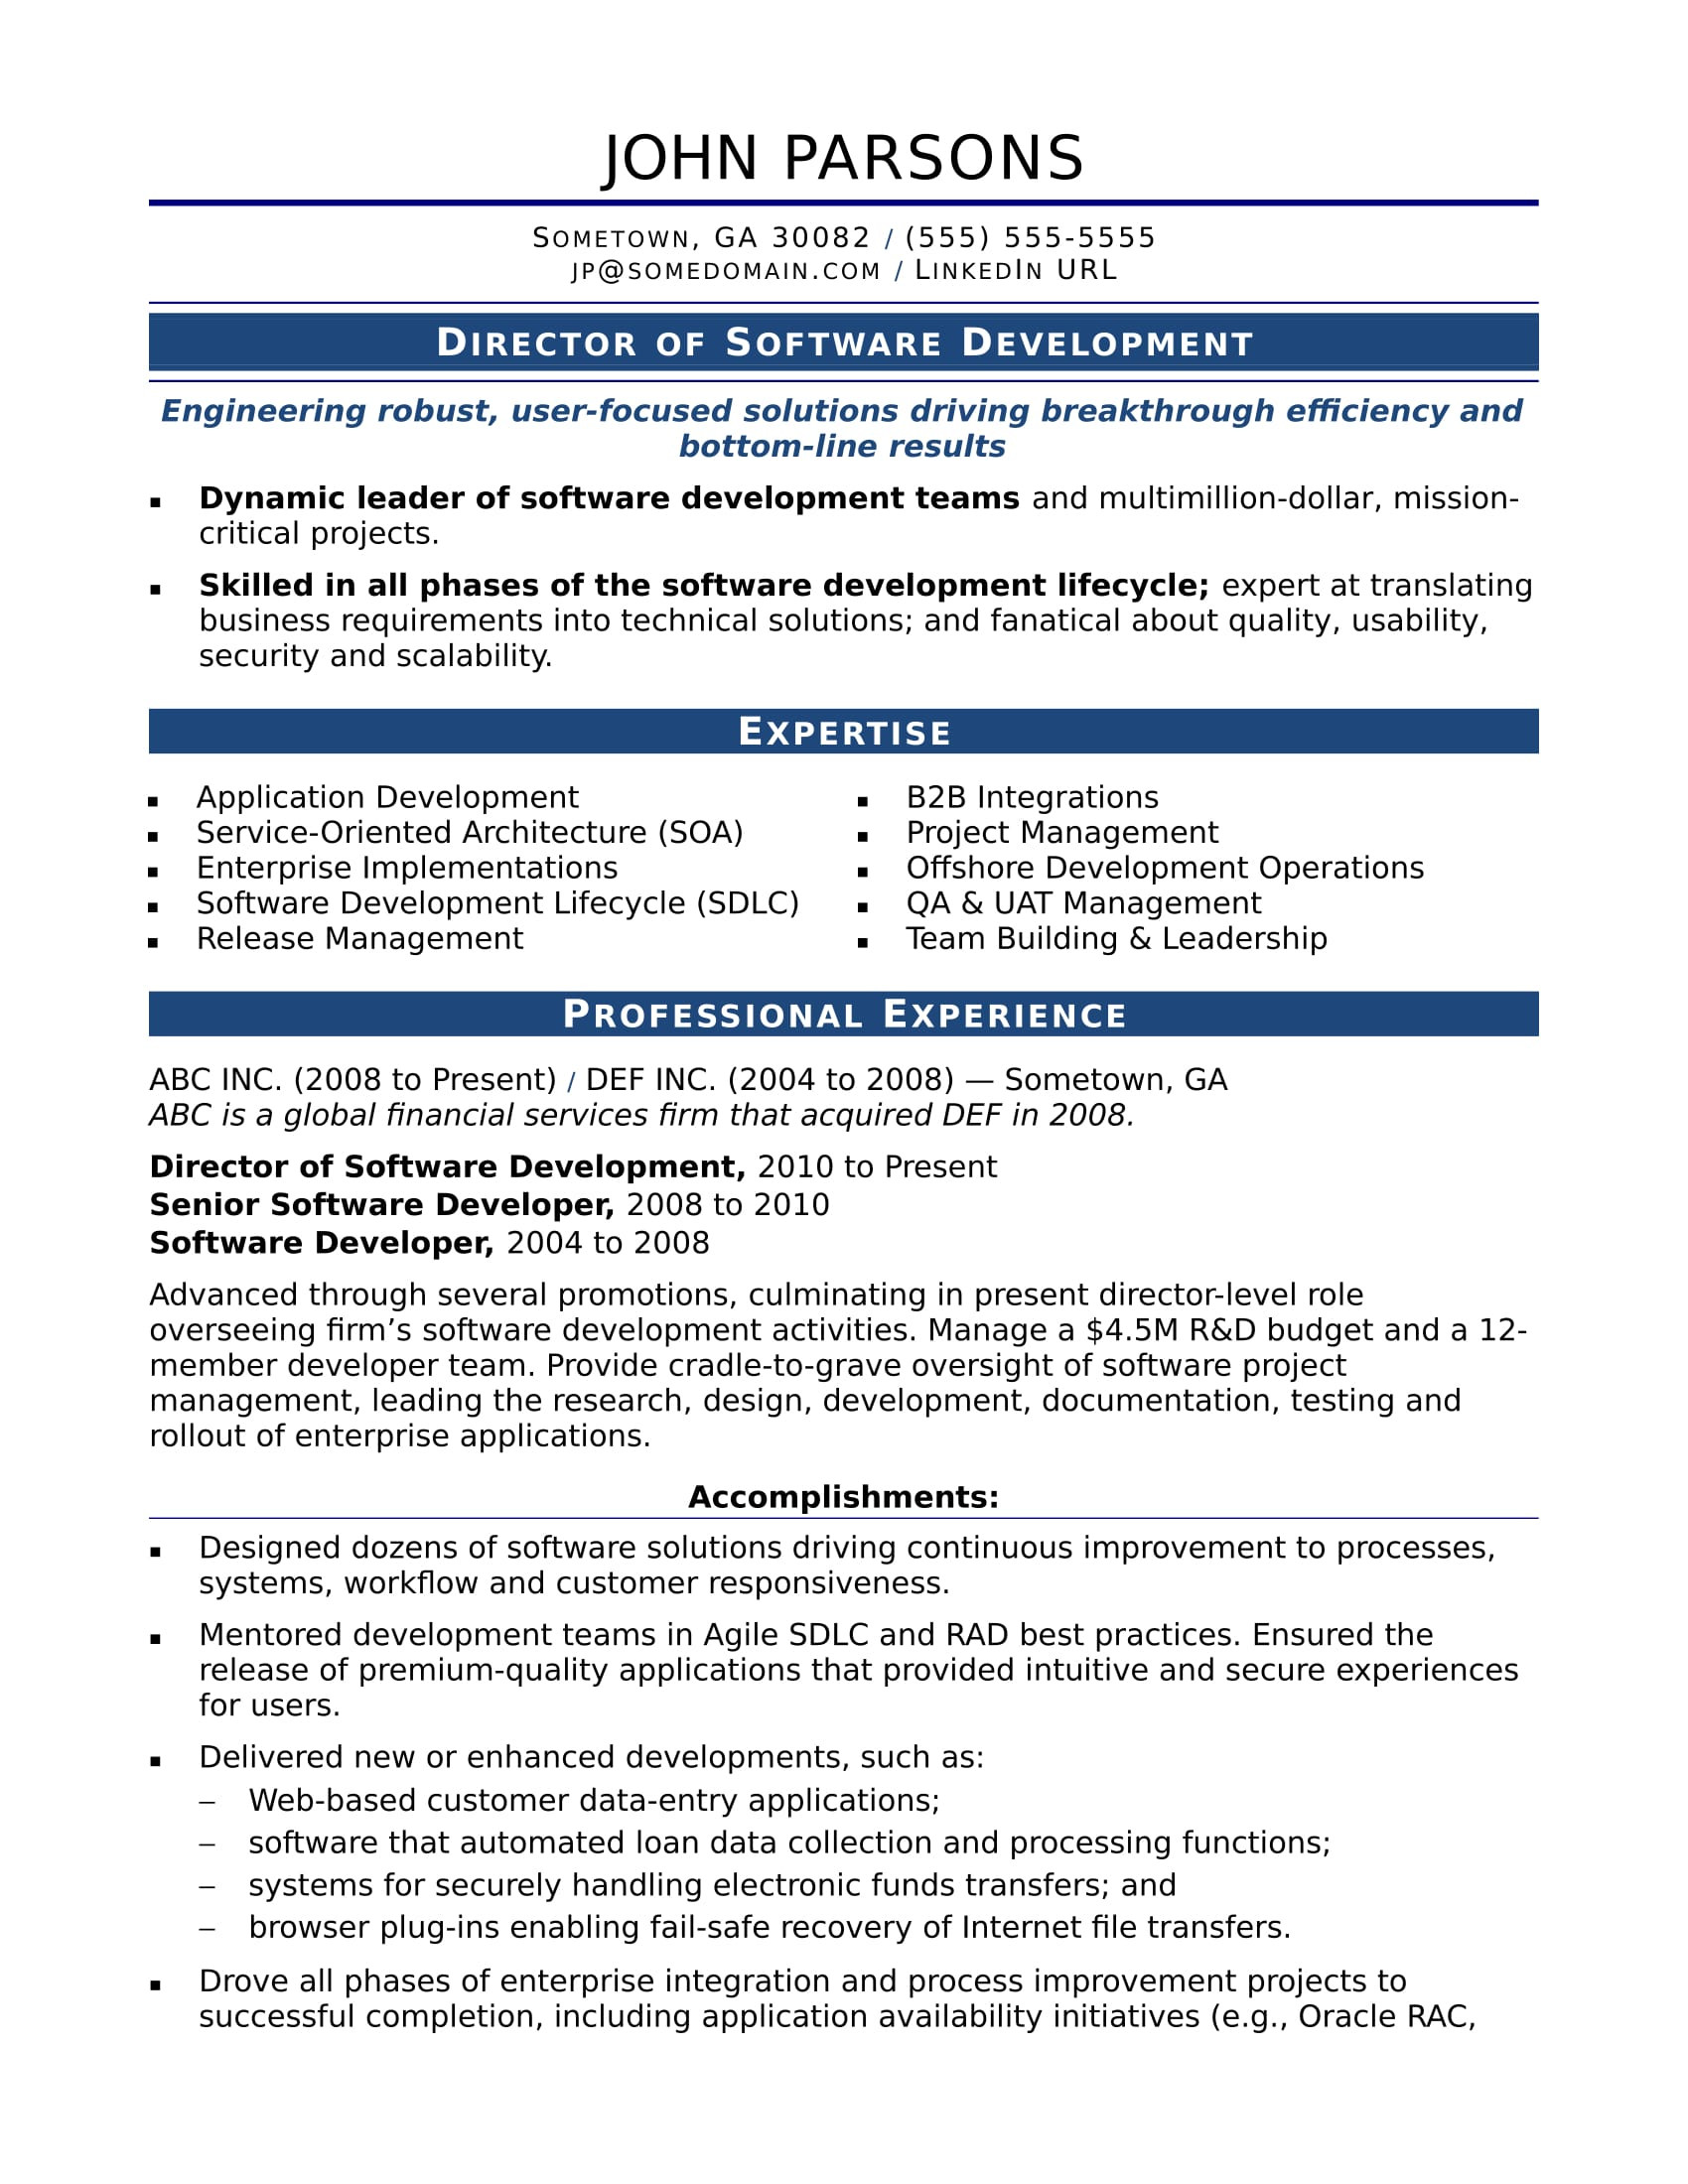 Sample Resume format for Experienced software Developer Sample Resume for An Experienced It Developer